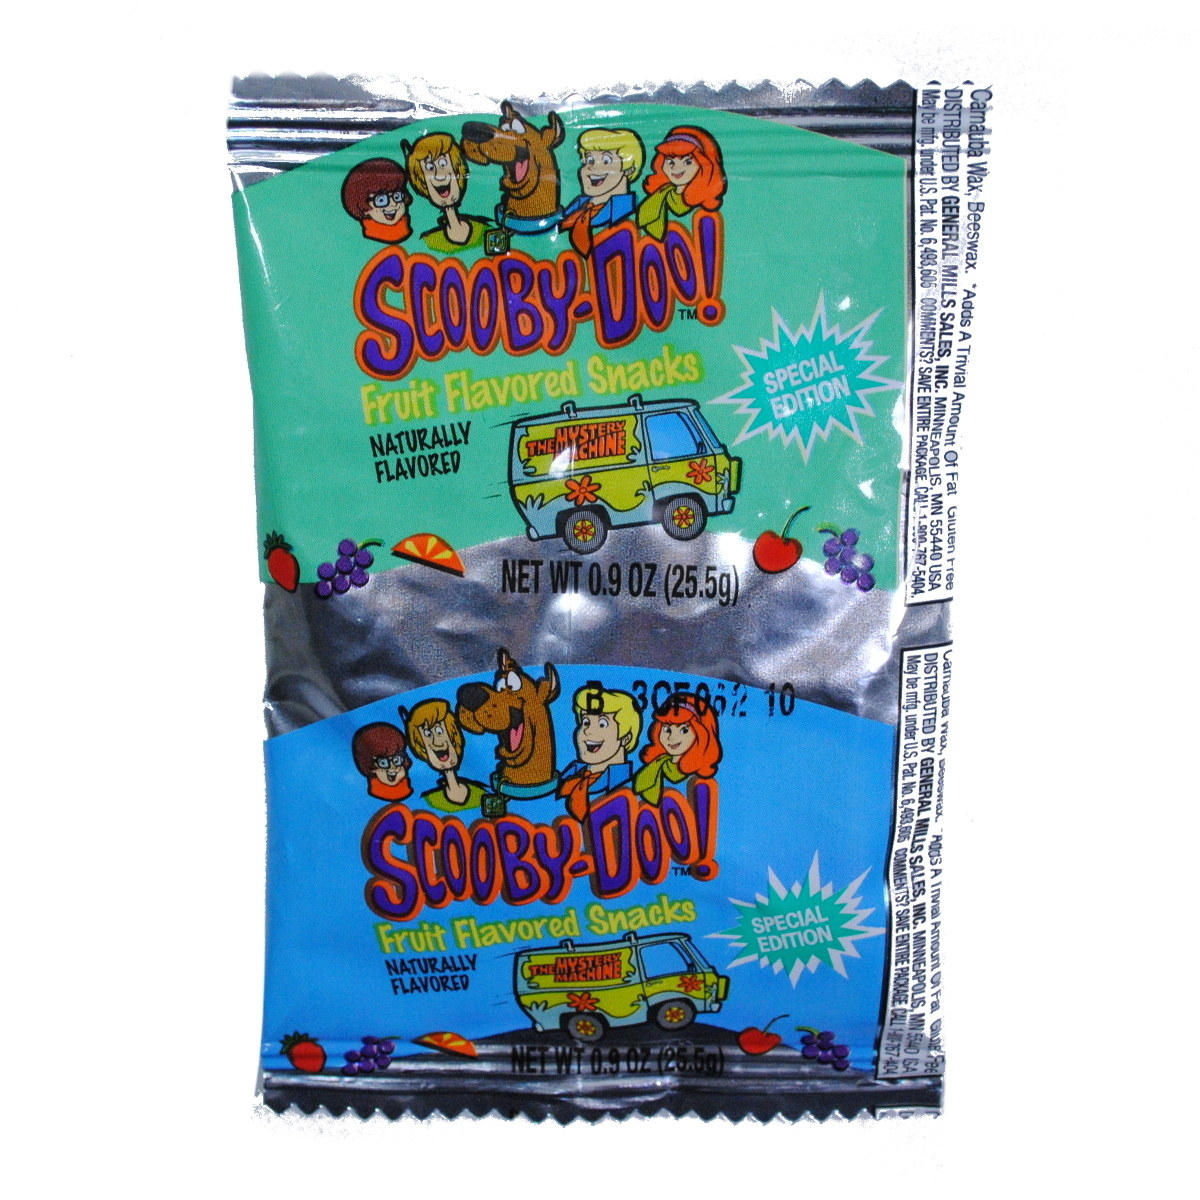 aluminum-plastic bag of scooby doo fruit snacks, with the scooby doo gang on it